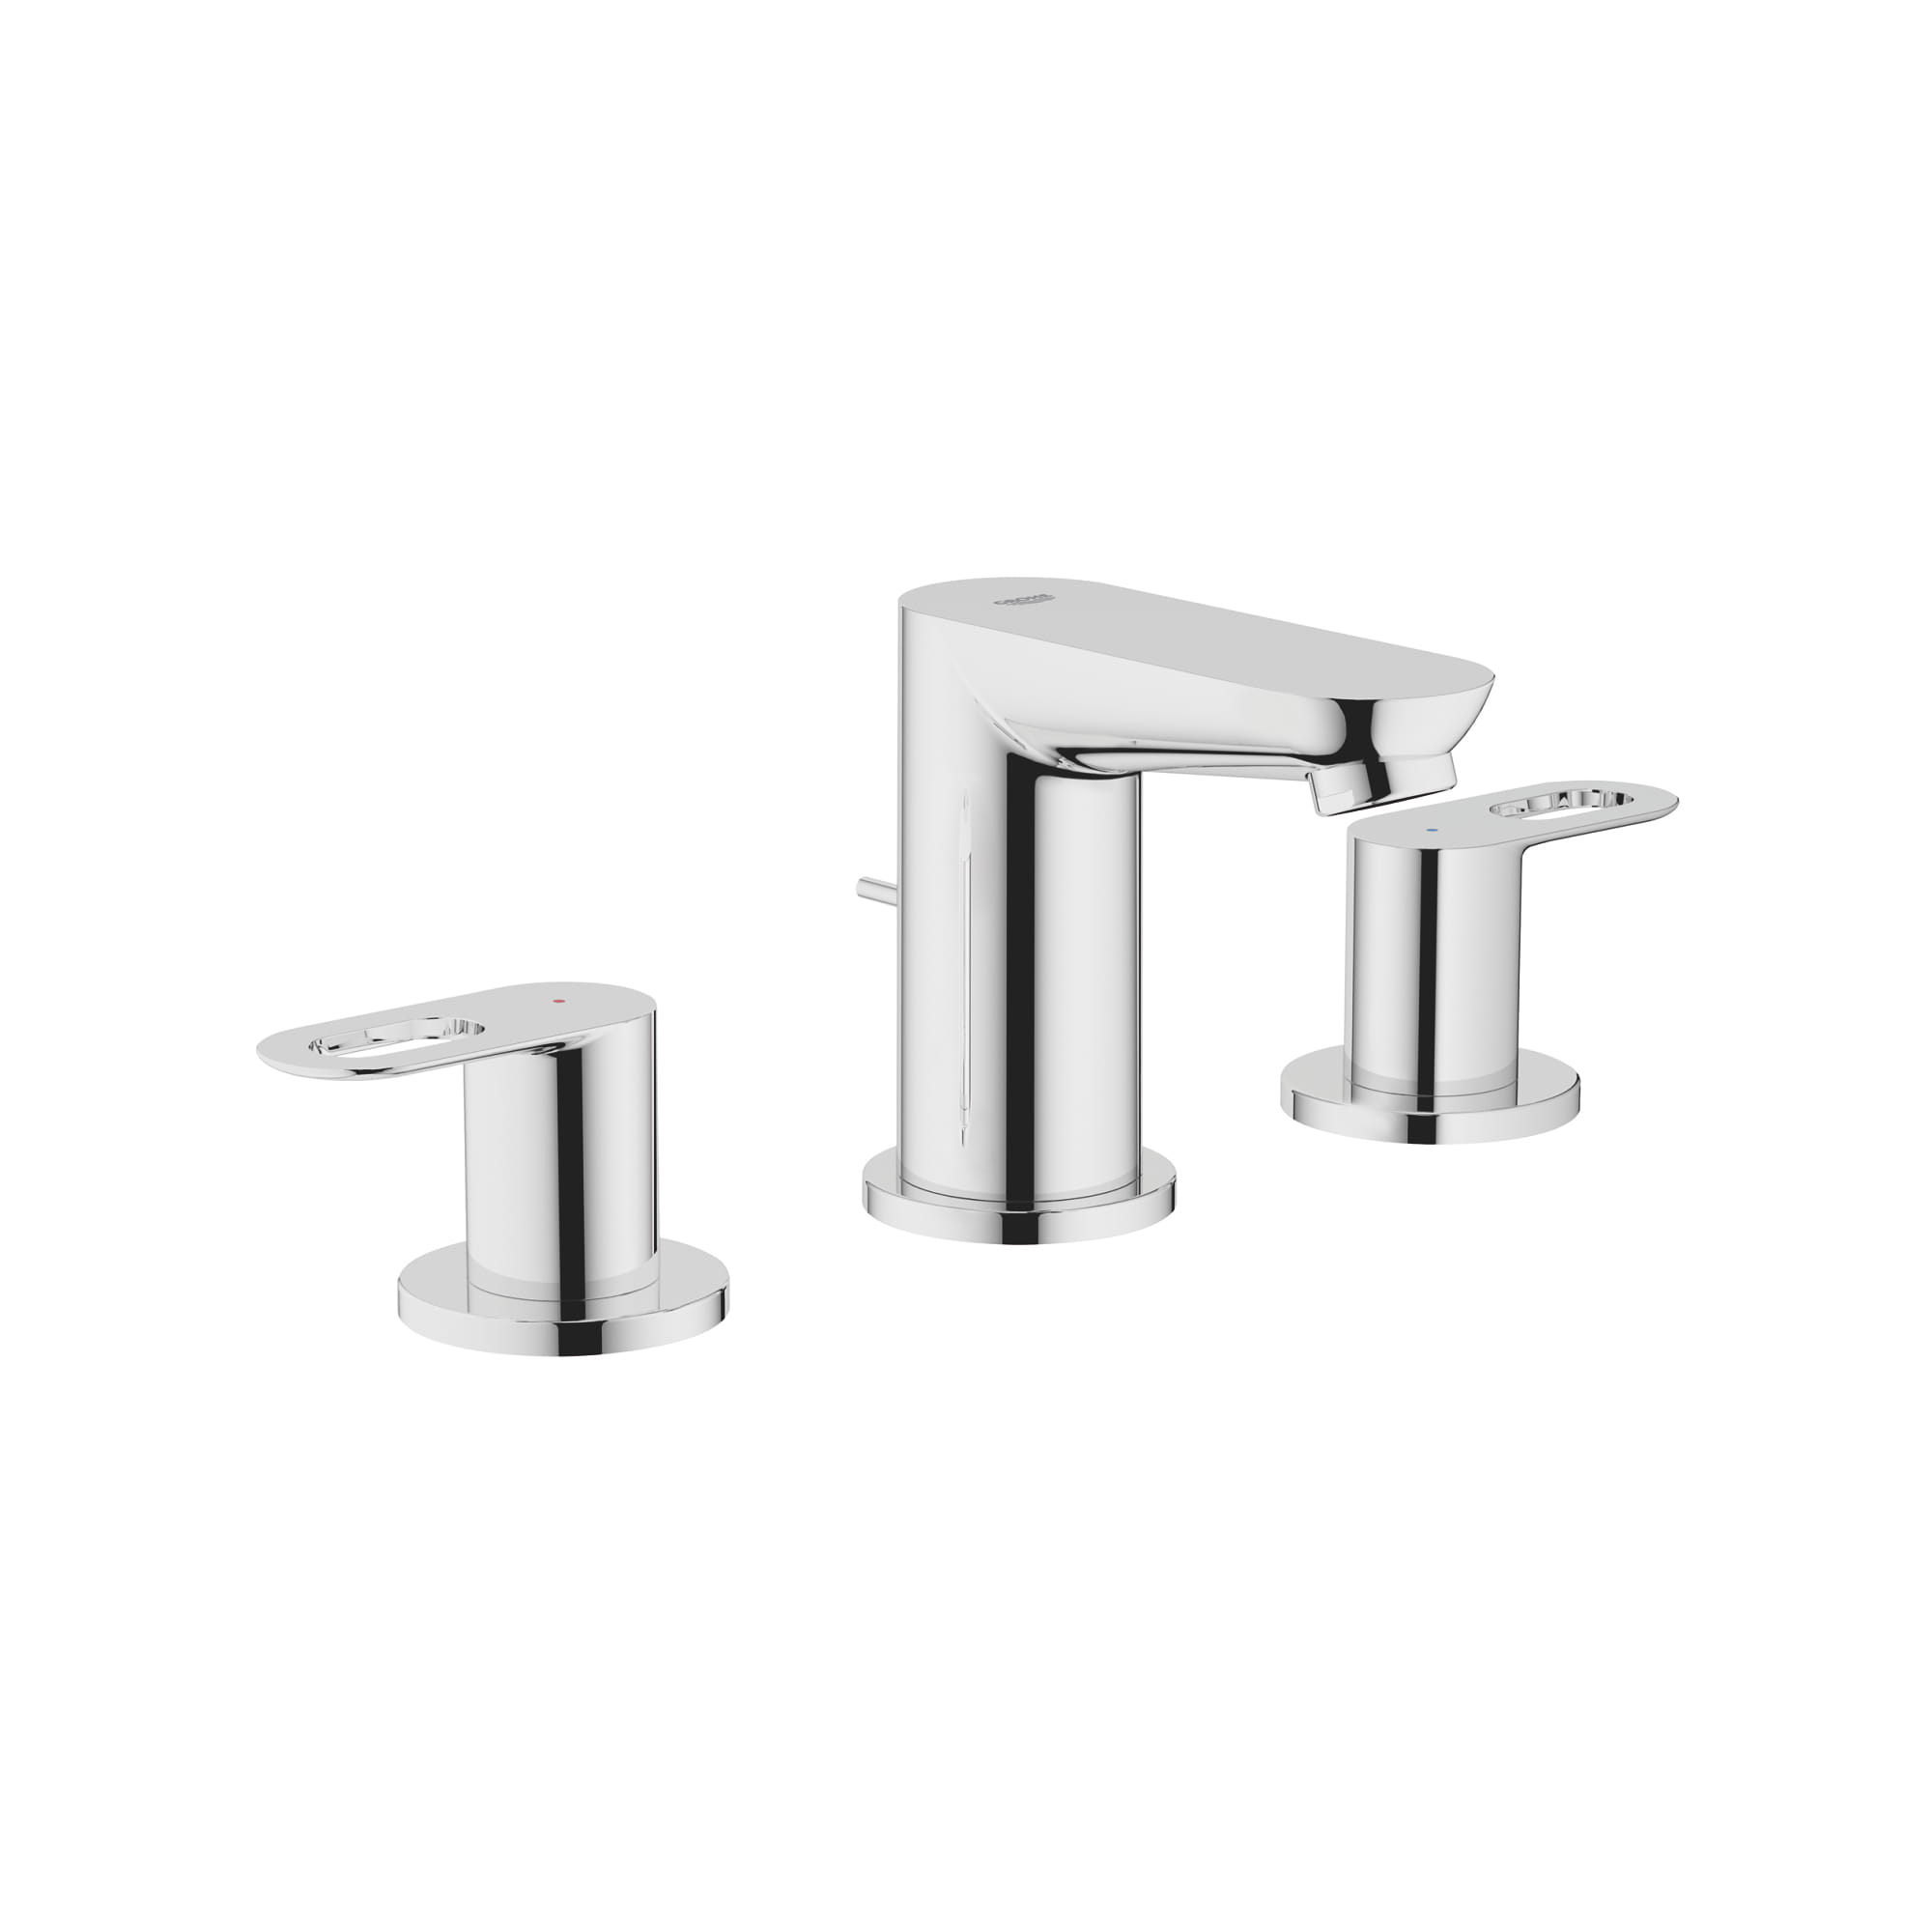 8-INCH WIDESPREAD 2-HANDLE S-SIZE BATHROOM FAUCET 1.5 GPM-related